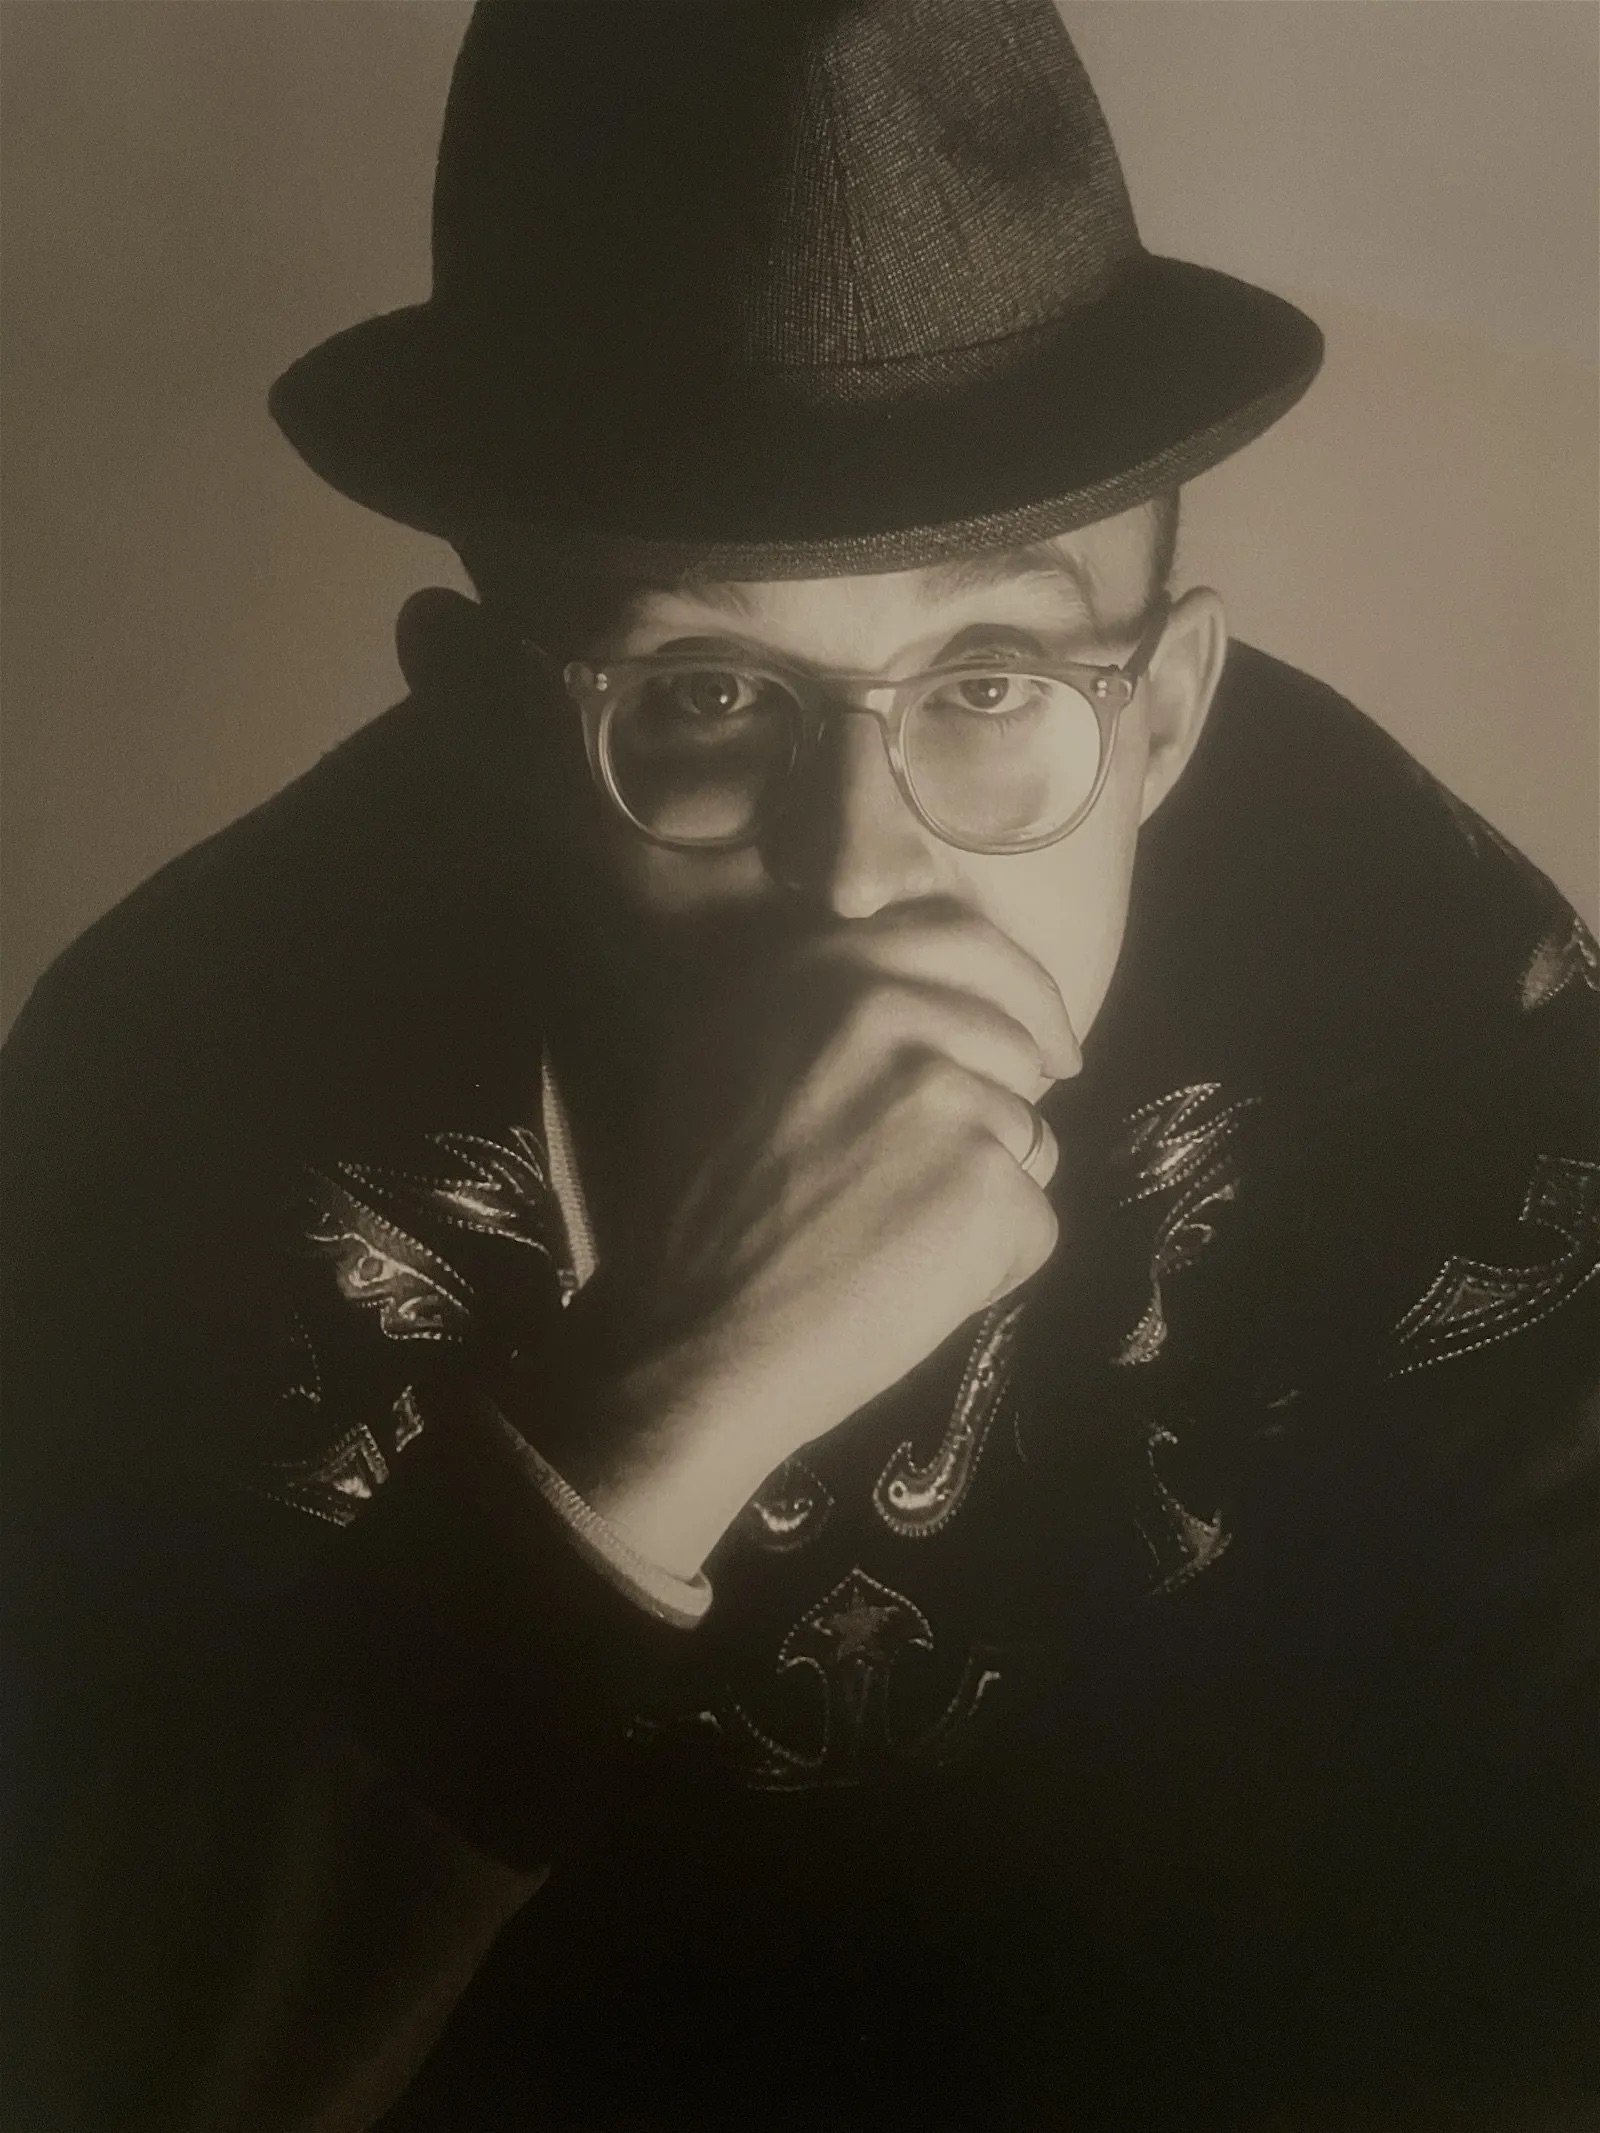 Herb Ritts "Keith Haring, New York, 1989" Print - Image 2 of 6